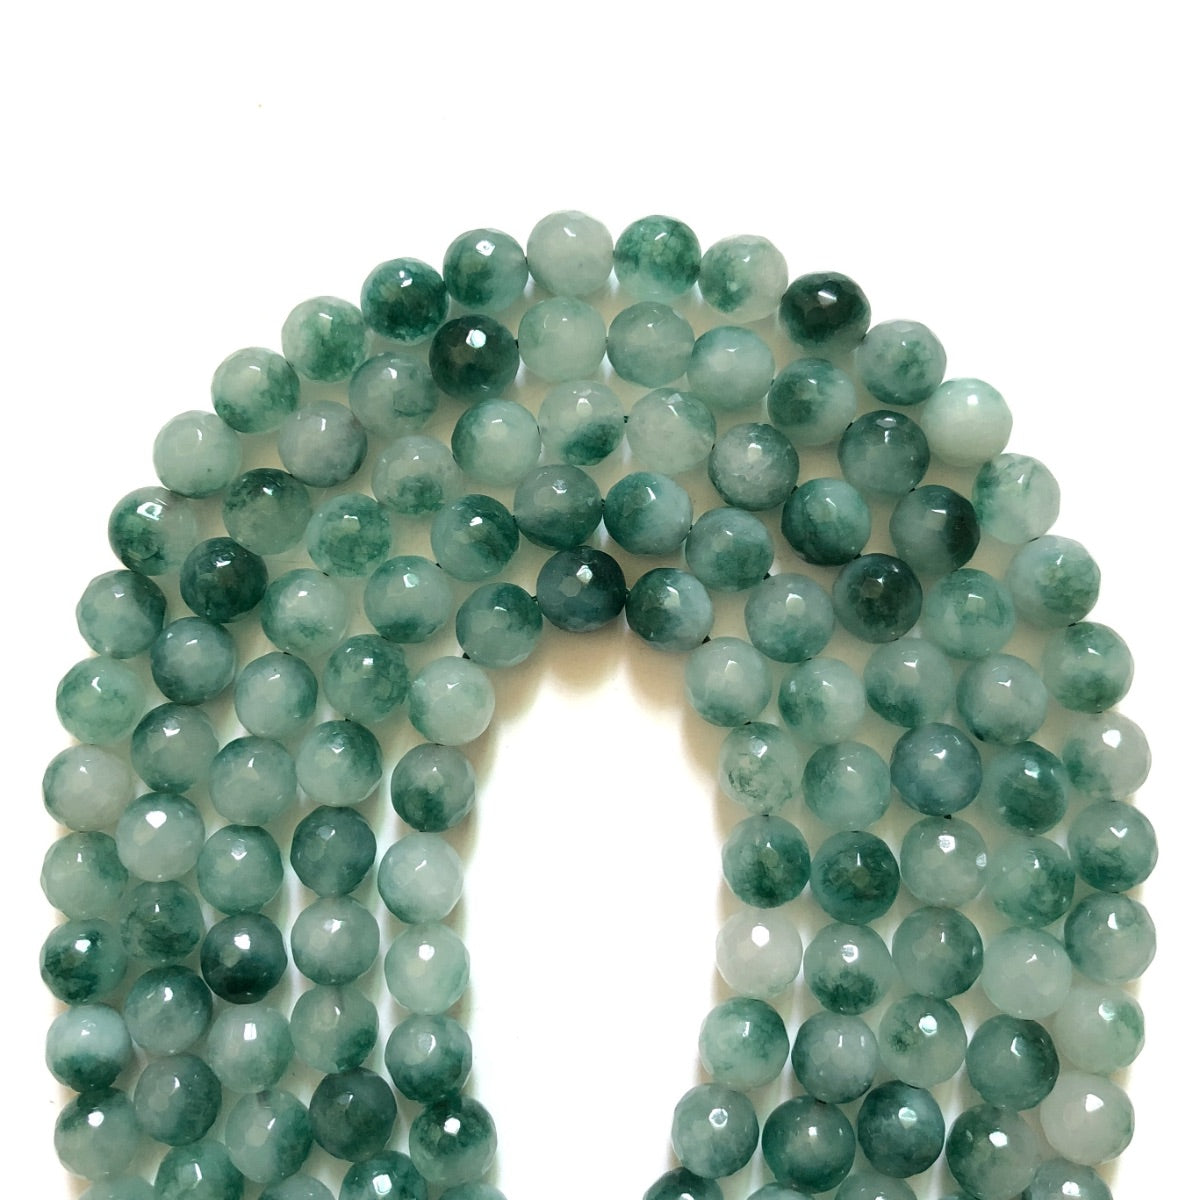 2 Strands/lot 10mm White Green Faceted Jade Stone Beads Stone Beads Faceted Jade Beads New Beads Arrivals Charms Beads Beyond